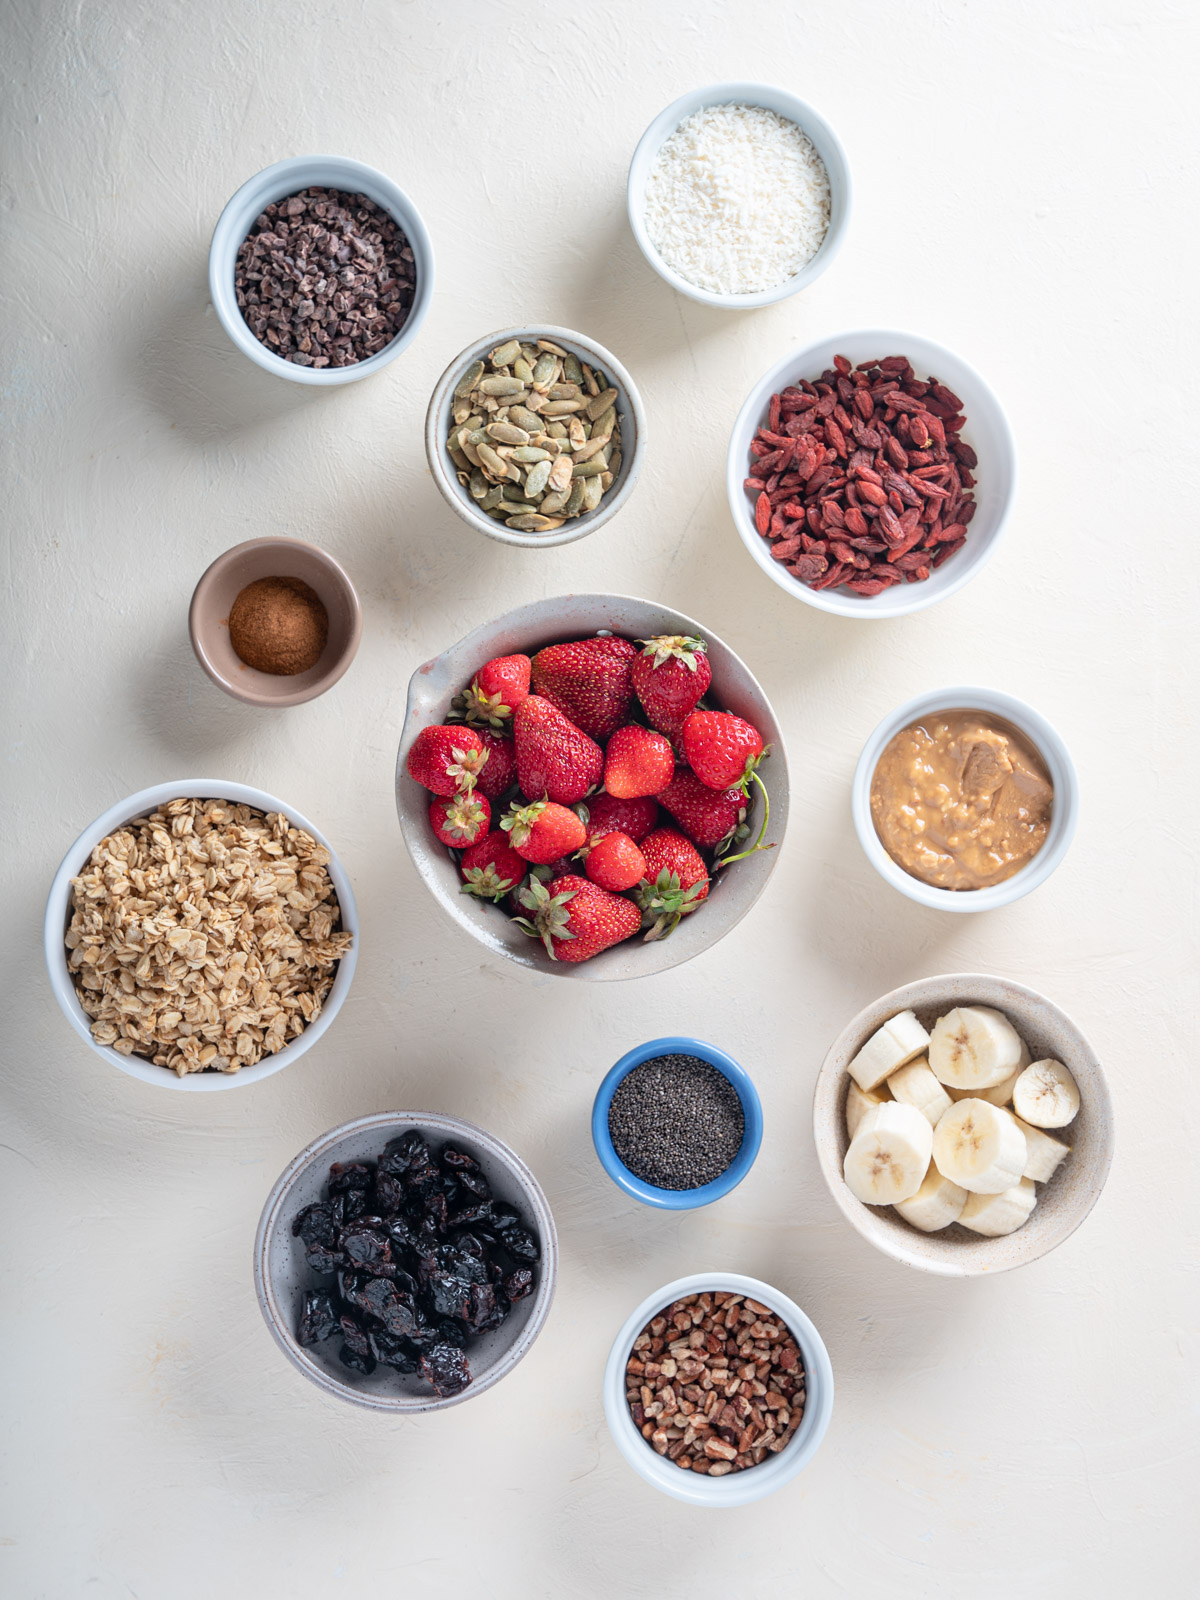 Top down of ingredients in various bowls. The ingredients include whole red strawberries, sliced banana, granola, goji berries, chia seeds, pecan pieces, coconut flakes, cinnamon, peanut butter, pumpkin seeds, and cocoa nibs. Bowls are placed on a cream background.